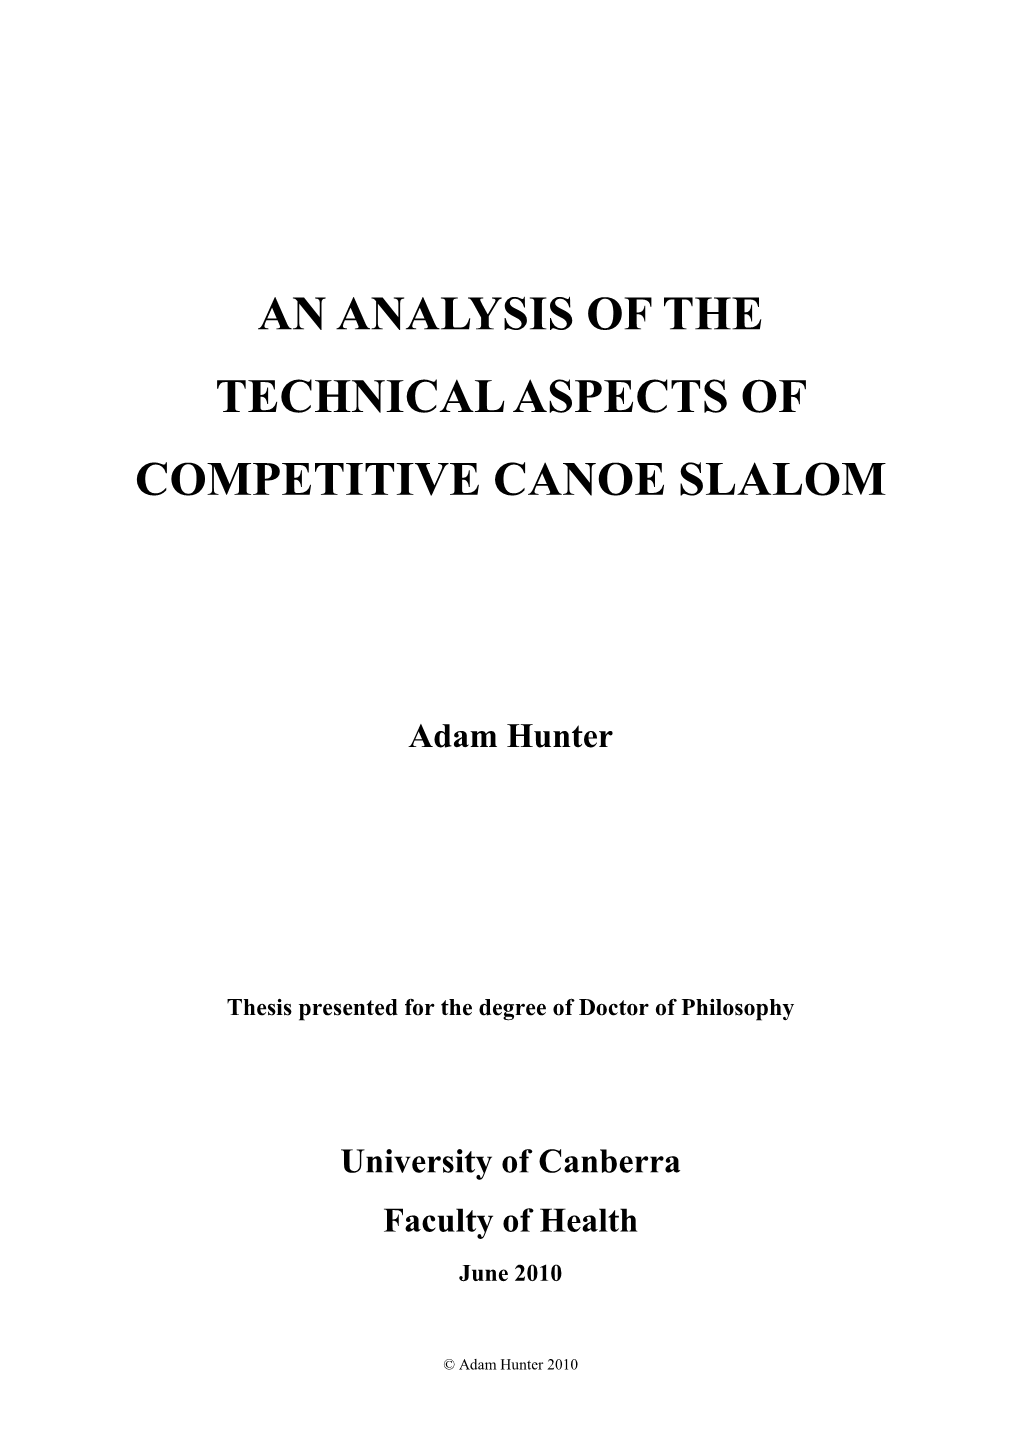 An Analysis of the Technical Aspects of Competitive Canoe Slalom